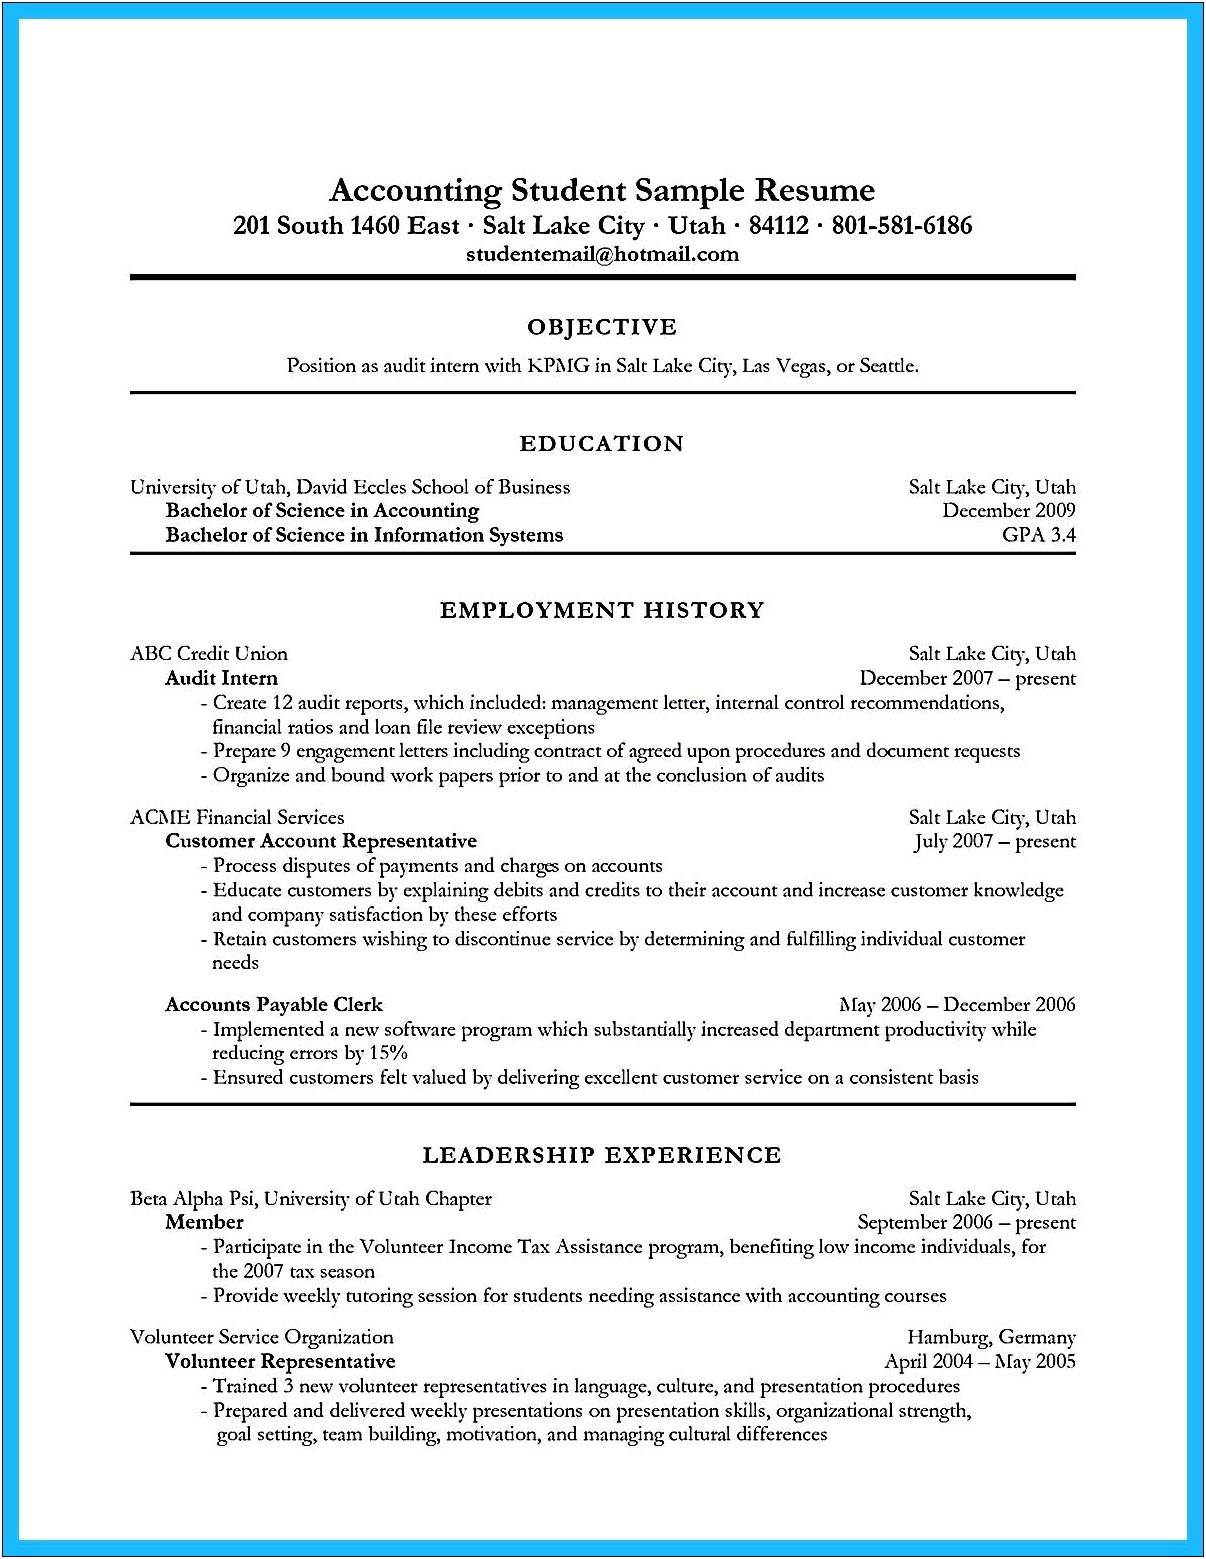 Accountant Looking For Accounting Position Objective For Resume